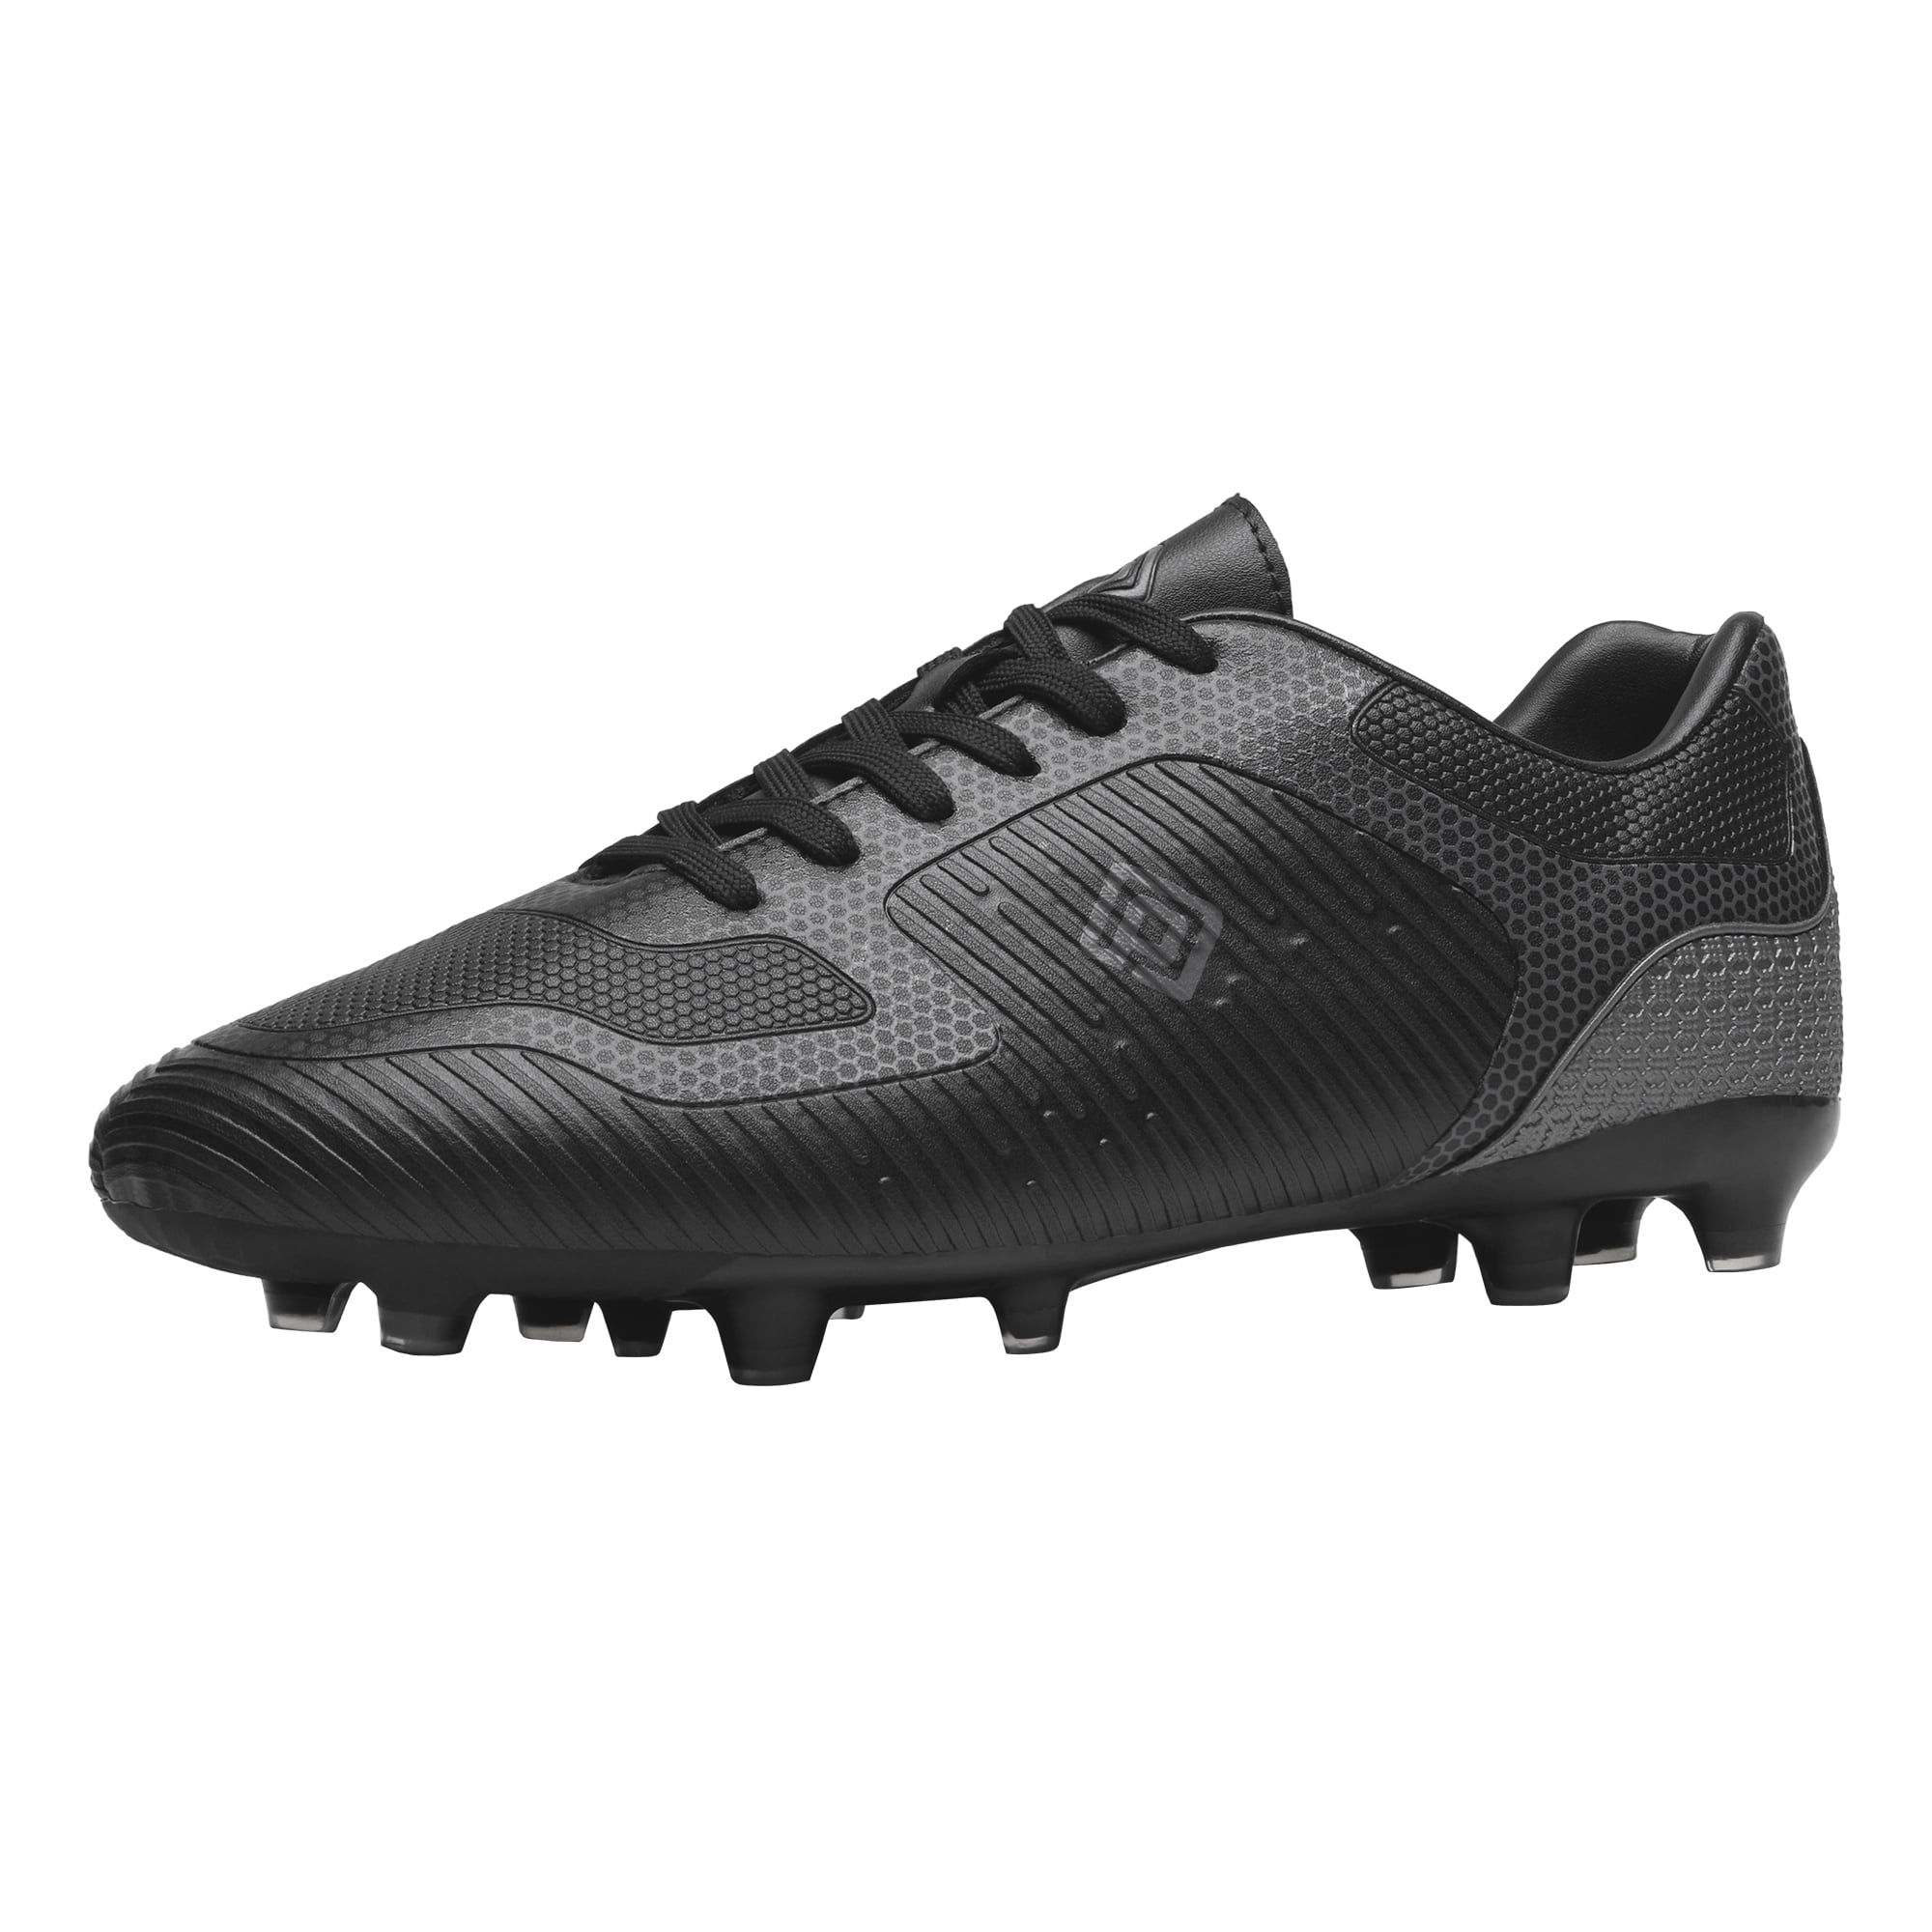 DREAM PAIRS Men's Firm Ground Soccer Cleats Shoes 